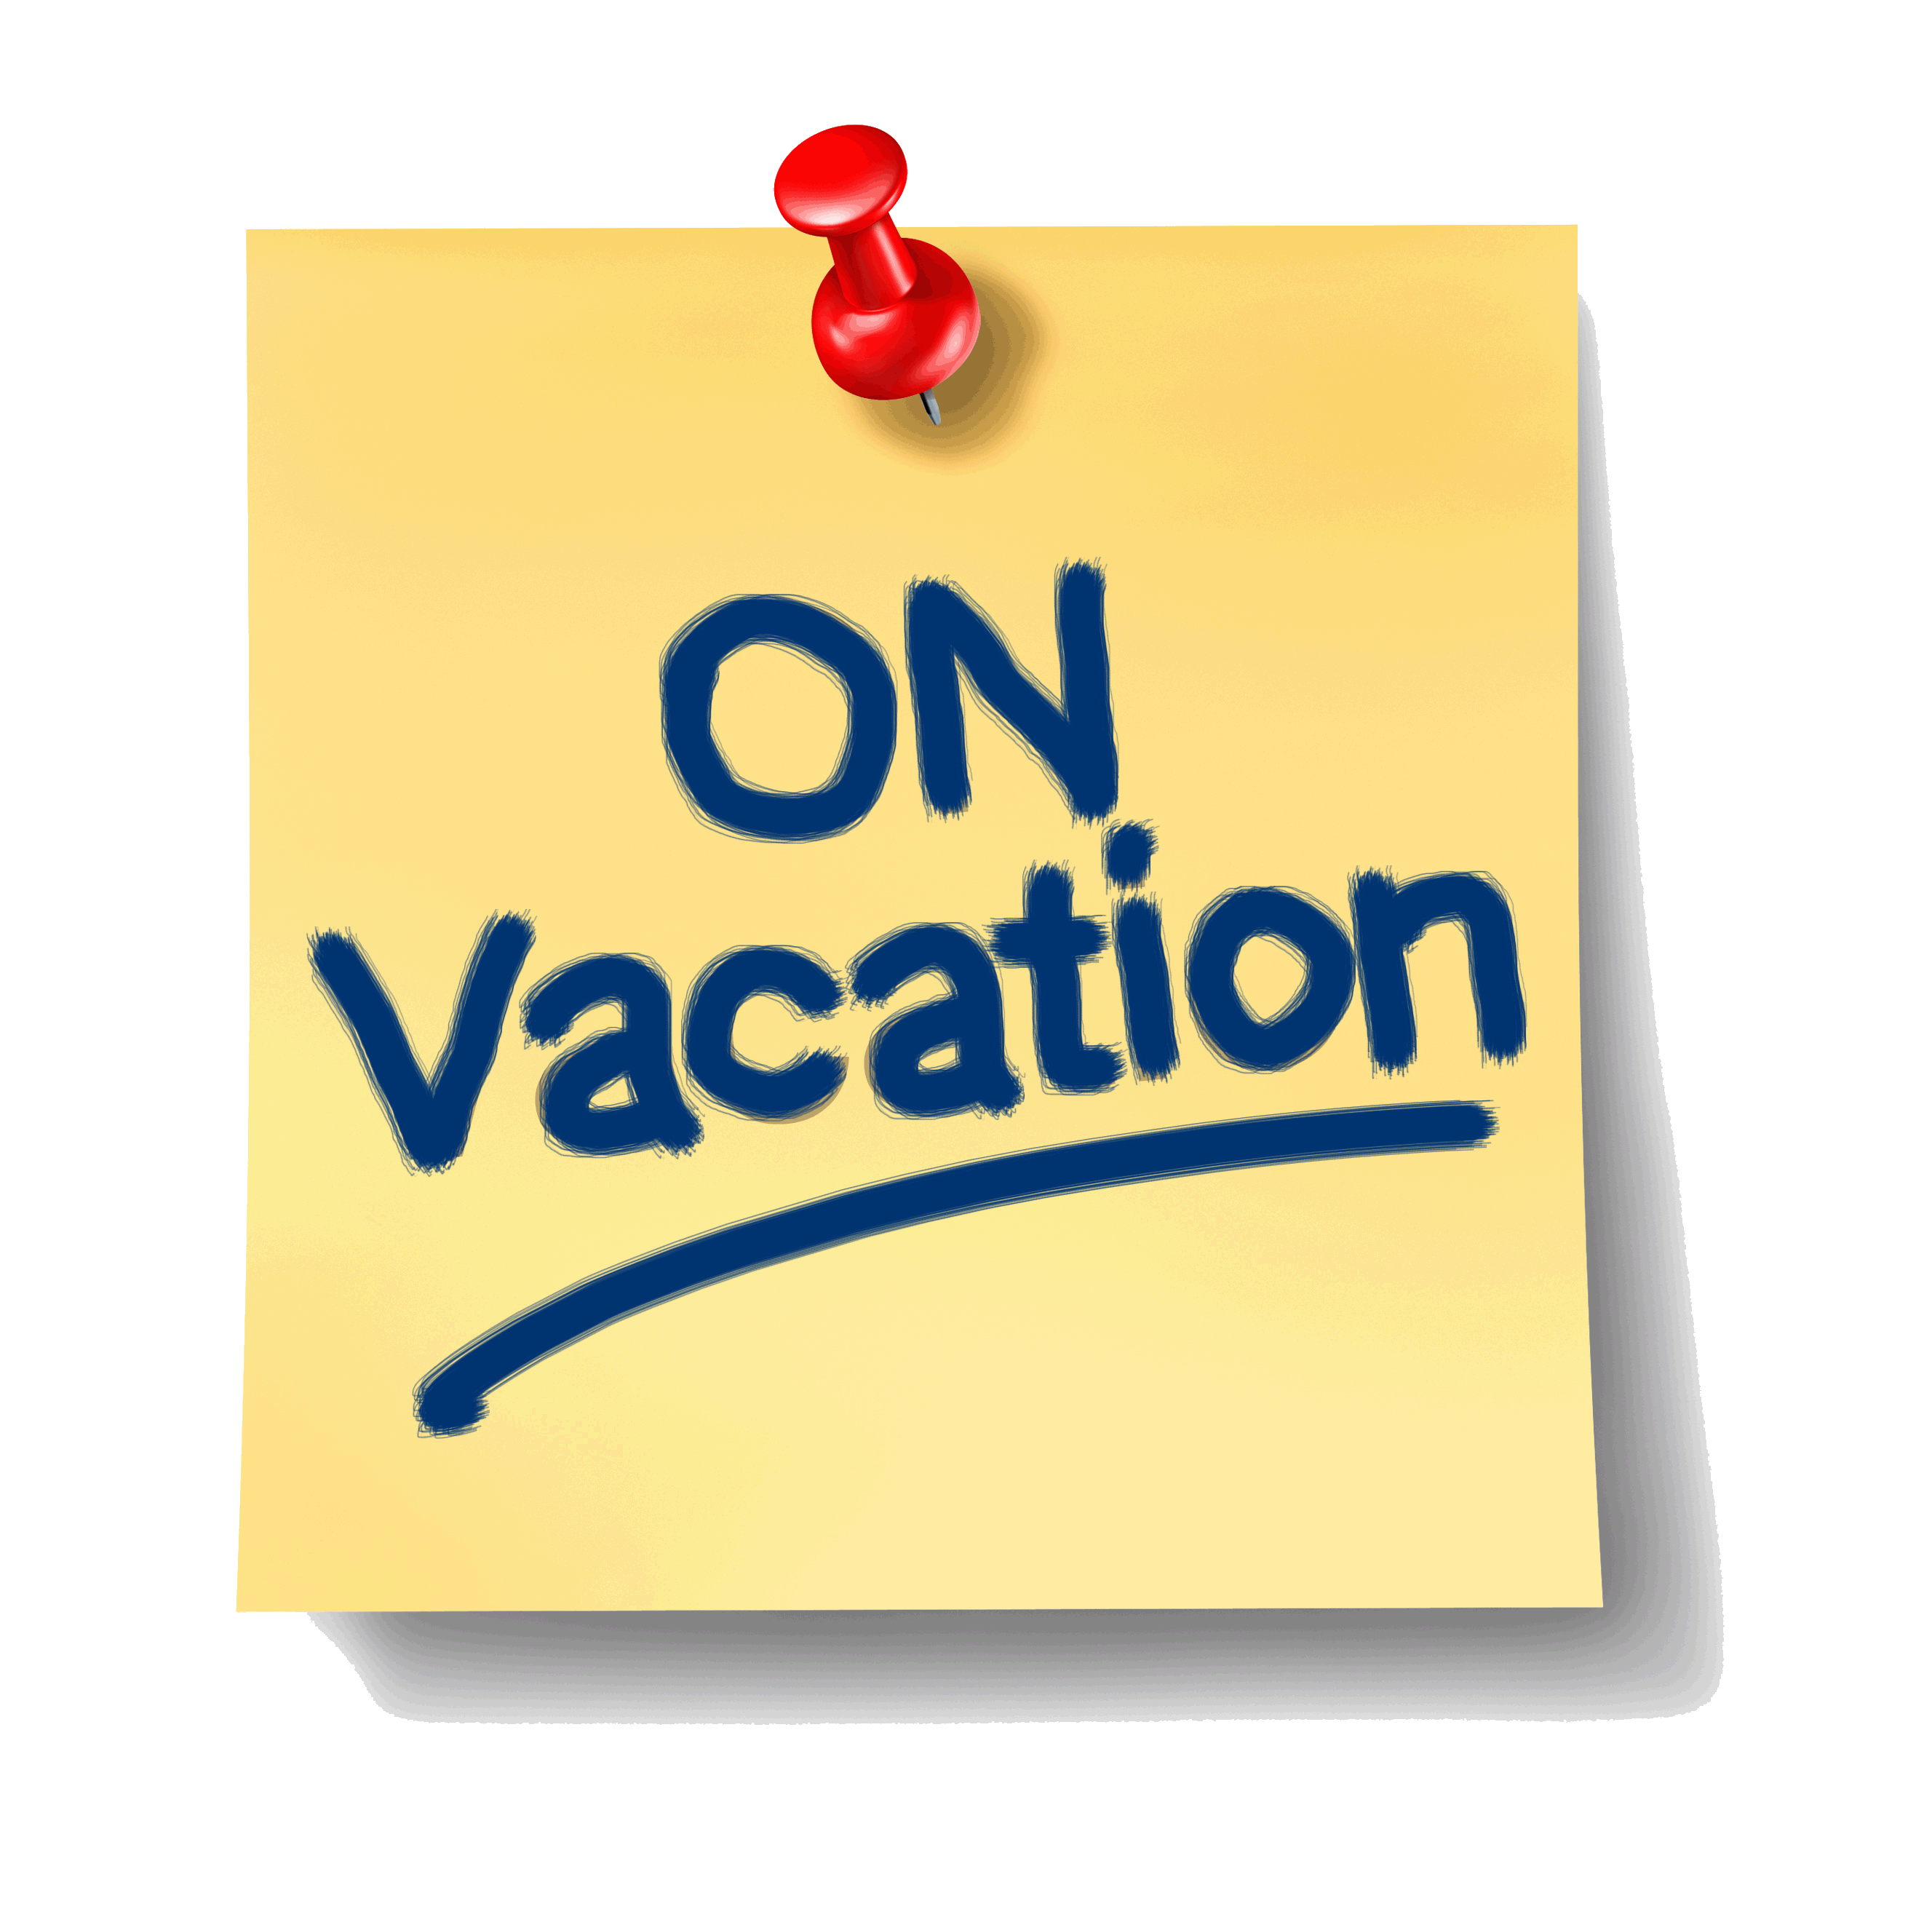 New year vacation message